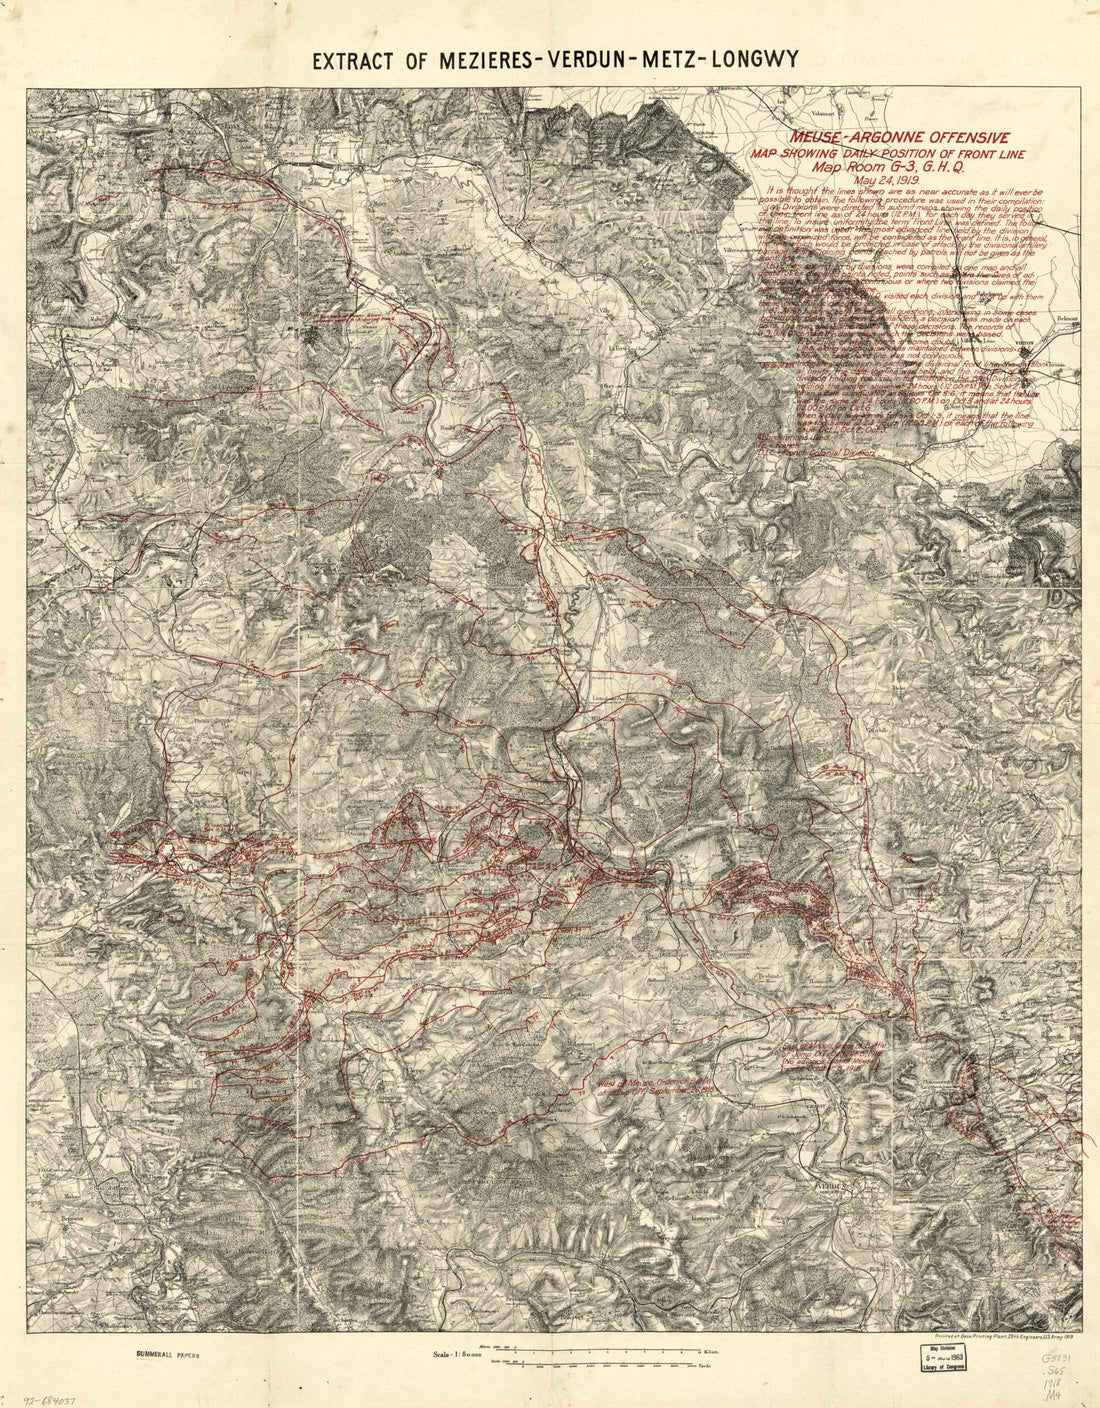 This old map of Argonne Offensive, Map Showing Daily Position of Front Line : Map Room G-3, G.H.Q., May 24, 1919 from 1918 was created by Charles Pelot Summerall, 29th United States. Army. Engineer Regiment in 1918